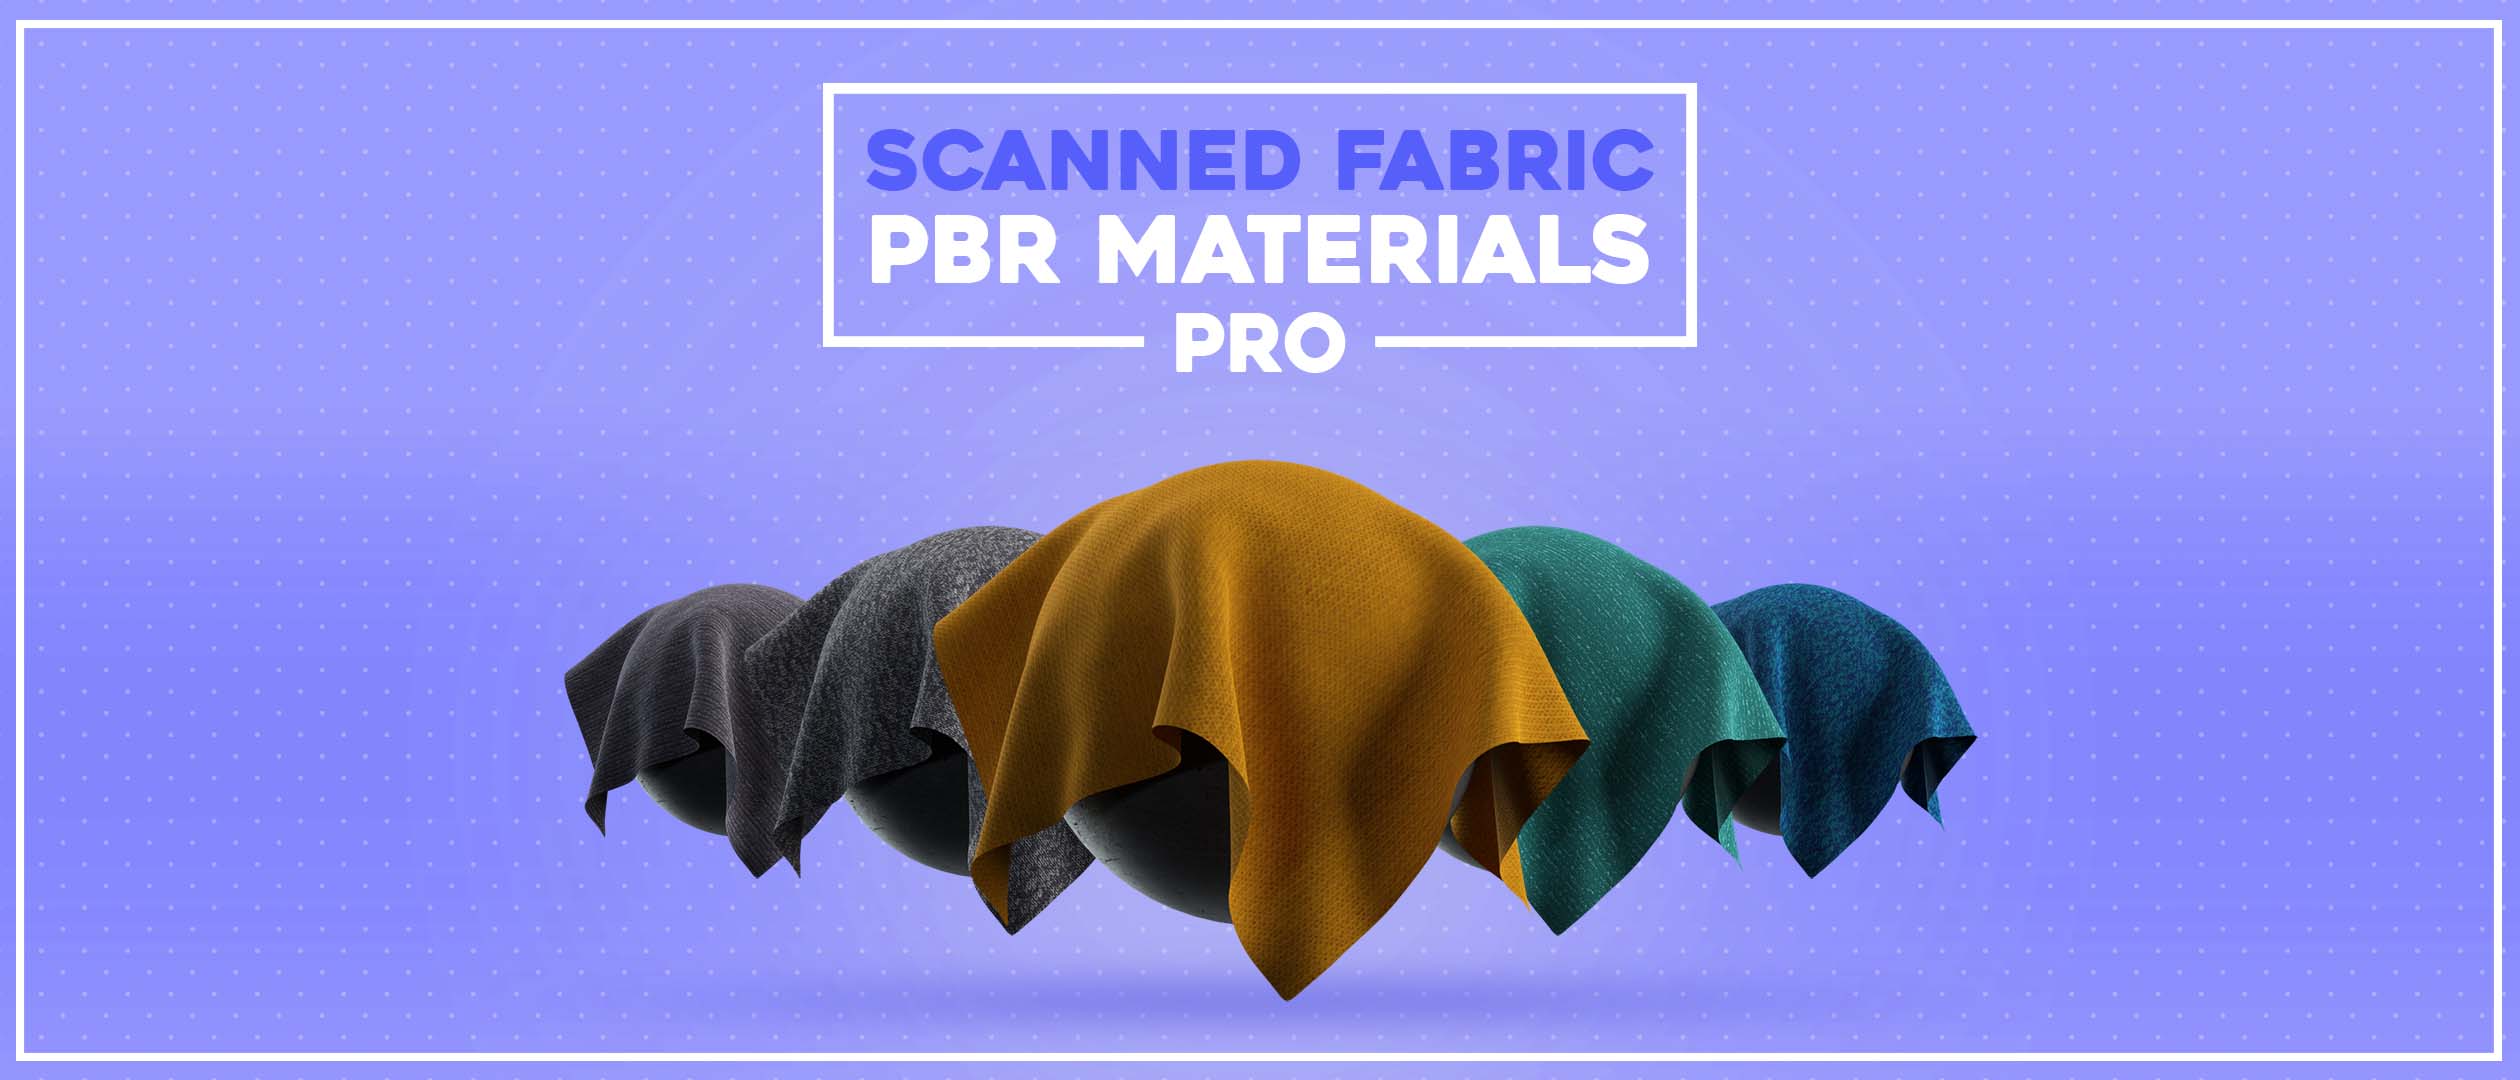 Scanned Fabric PBR Materials PRO